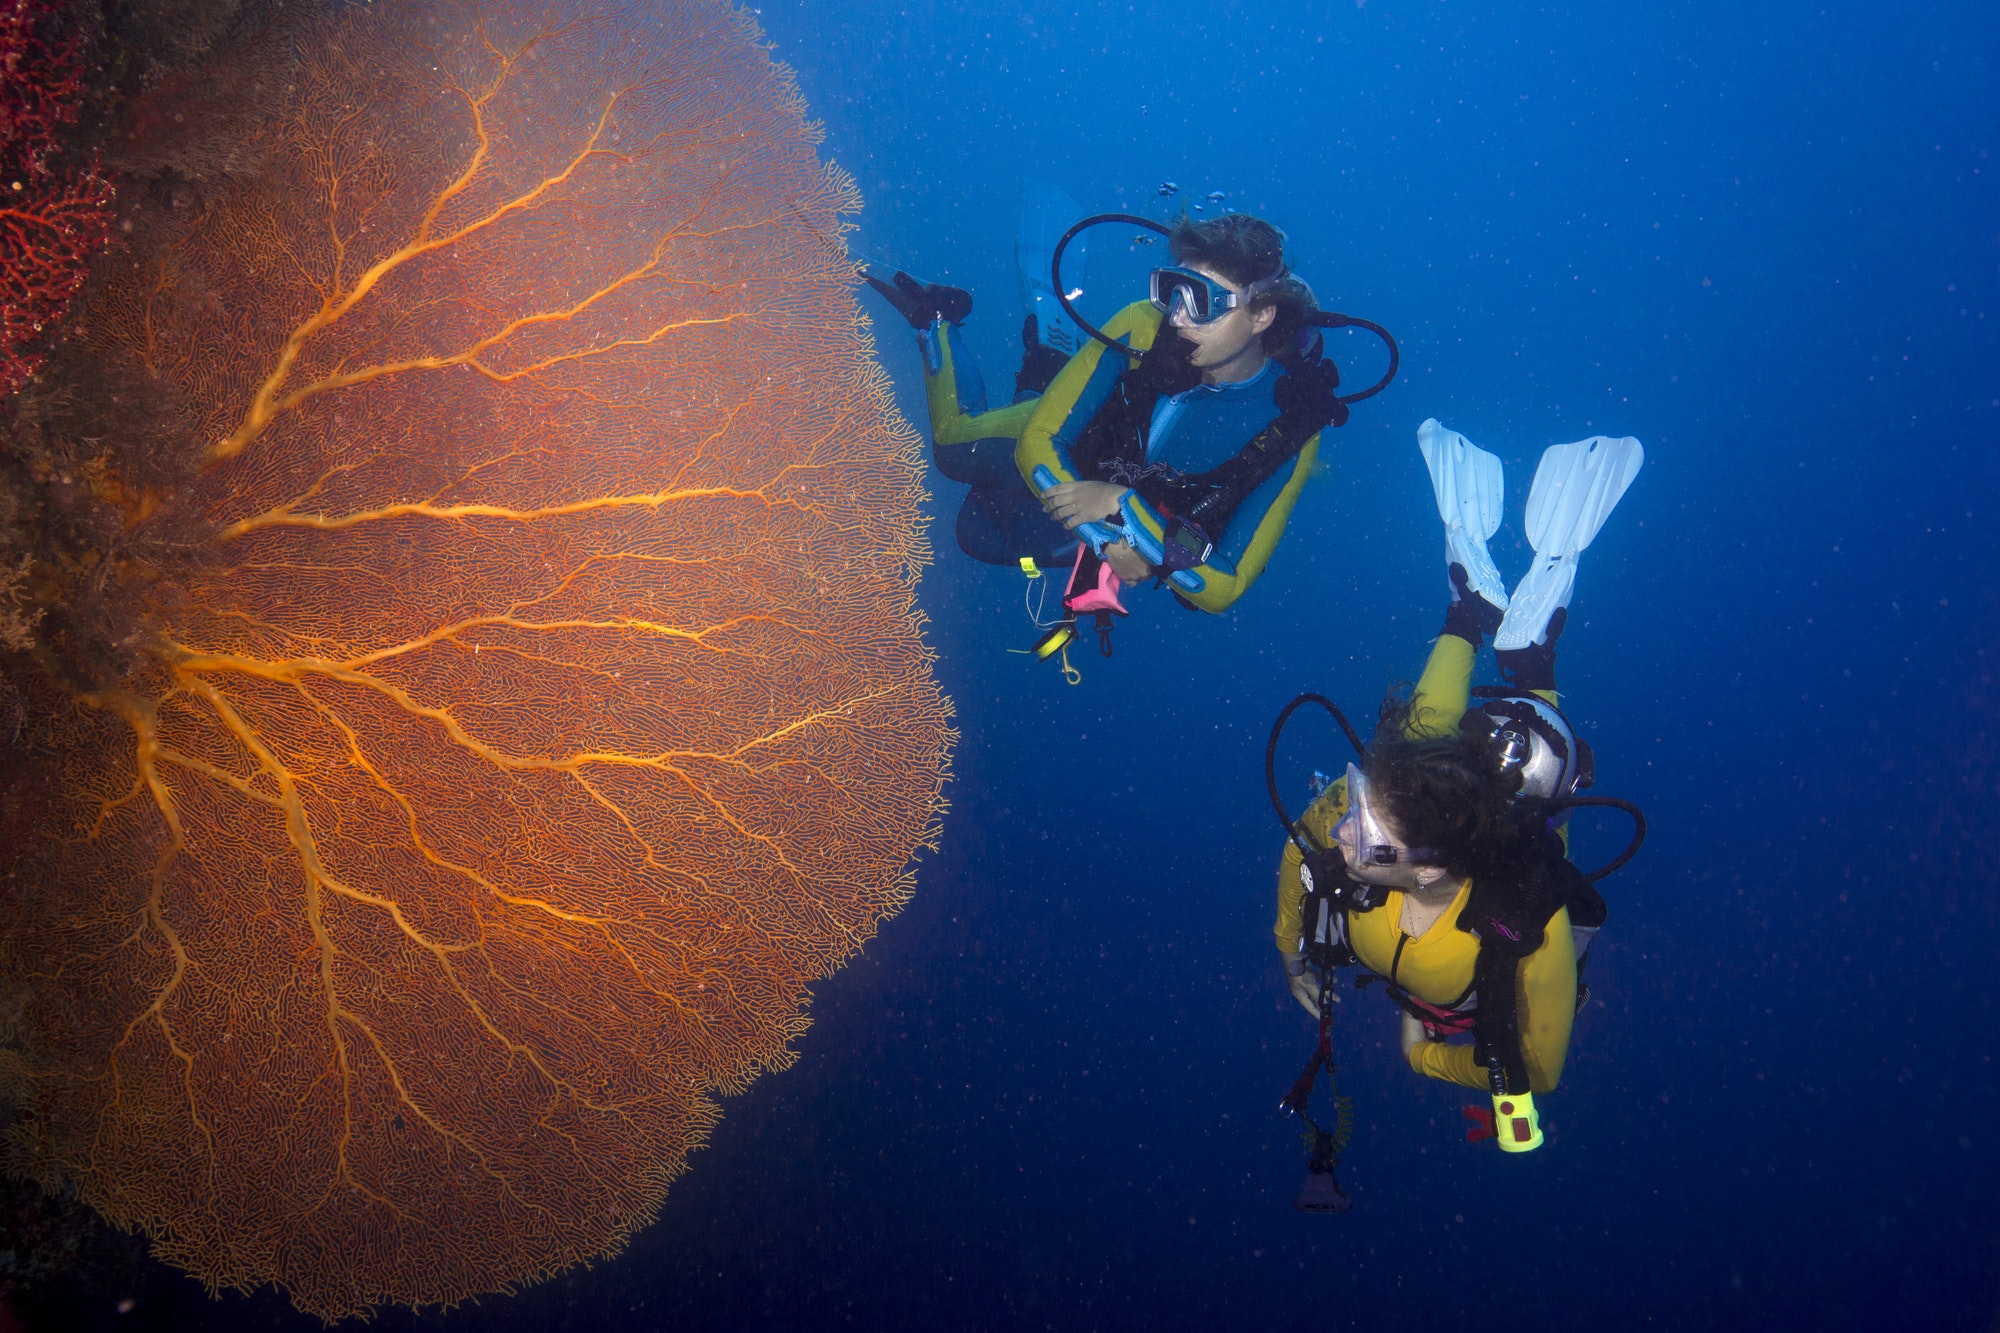 Pacific Ocean, Palau, scuba divers in coral reef with Giant Fan Coral